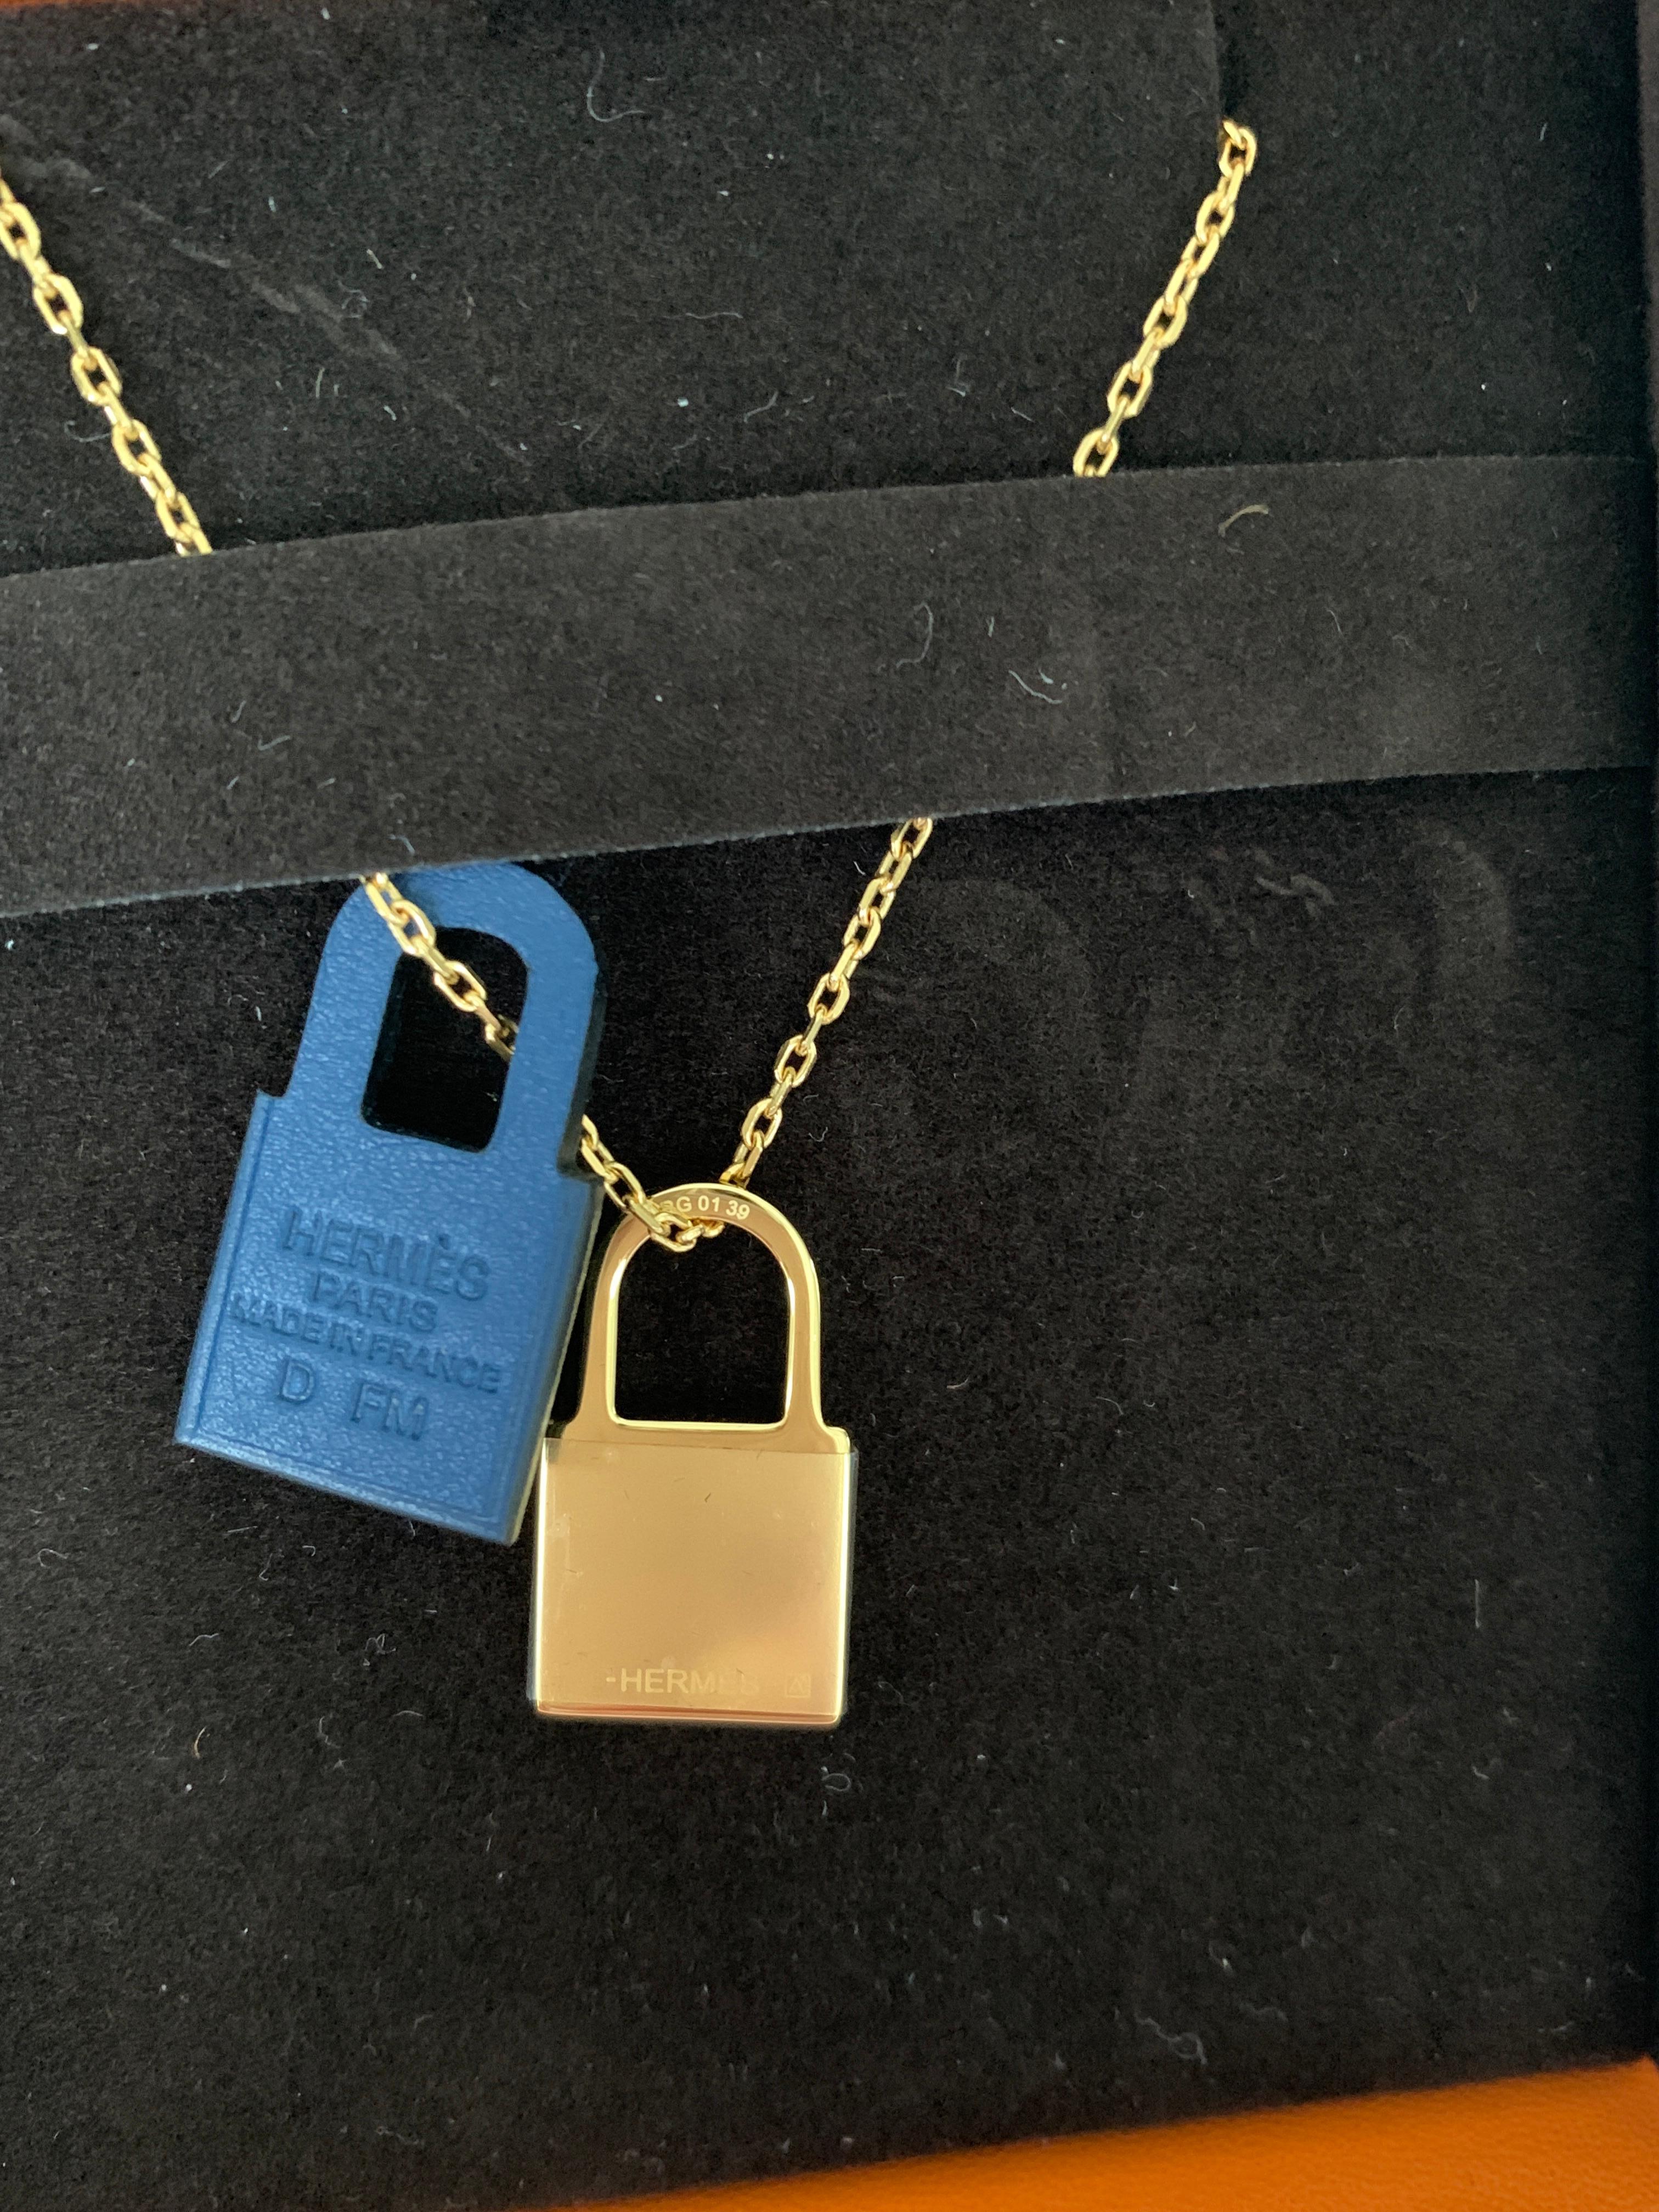 Hermes O'Kelly Pendant Necklace
Small Model
Deep Blue
Pendant in Swift calfskin with gold plated hardware.
The O’Kelly story gives pride of place to the eponymous bag’s padlock. Here, it is slimmed down and attached to a stylized leather padlock